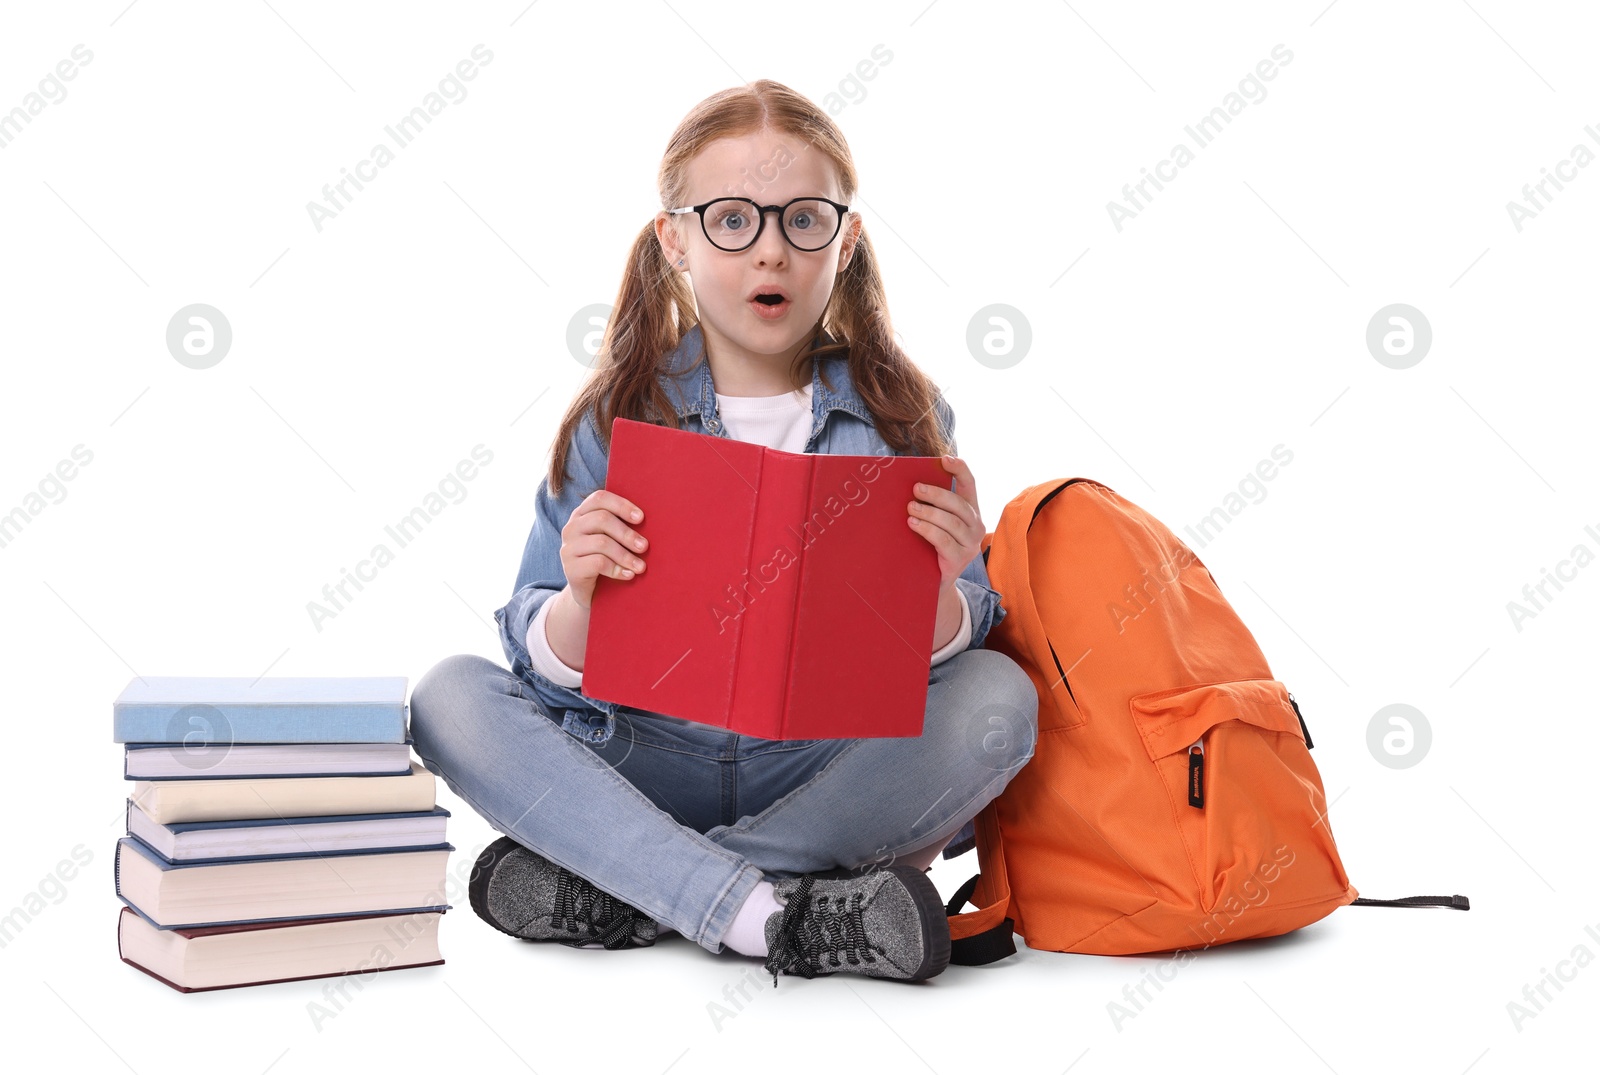 Photo of Cute little girl with stack of books and backpack on white background